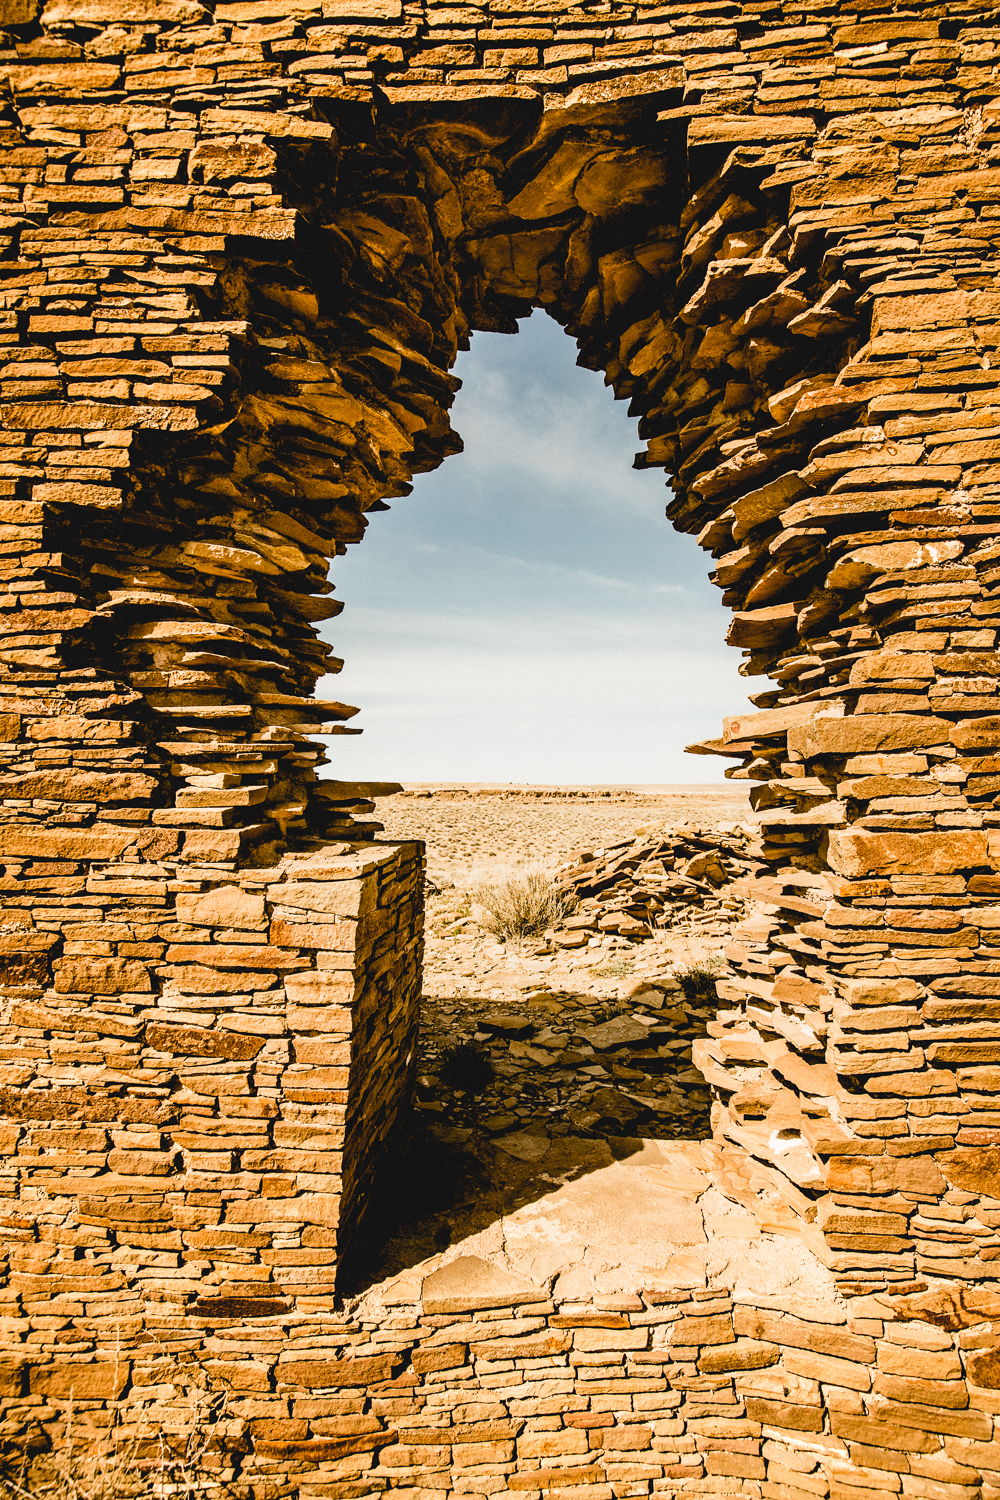 Chaco Culture National Historical Park ASMP ASMP-Mountain West ASMP-MTNWST National Parks System